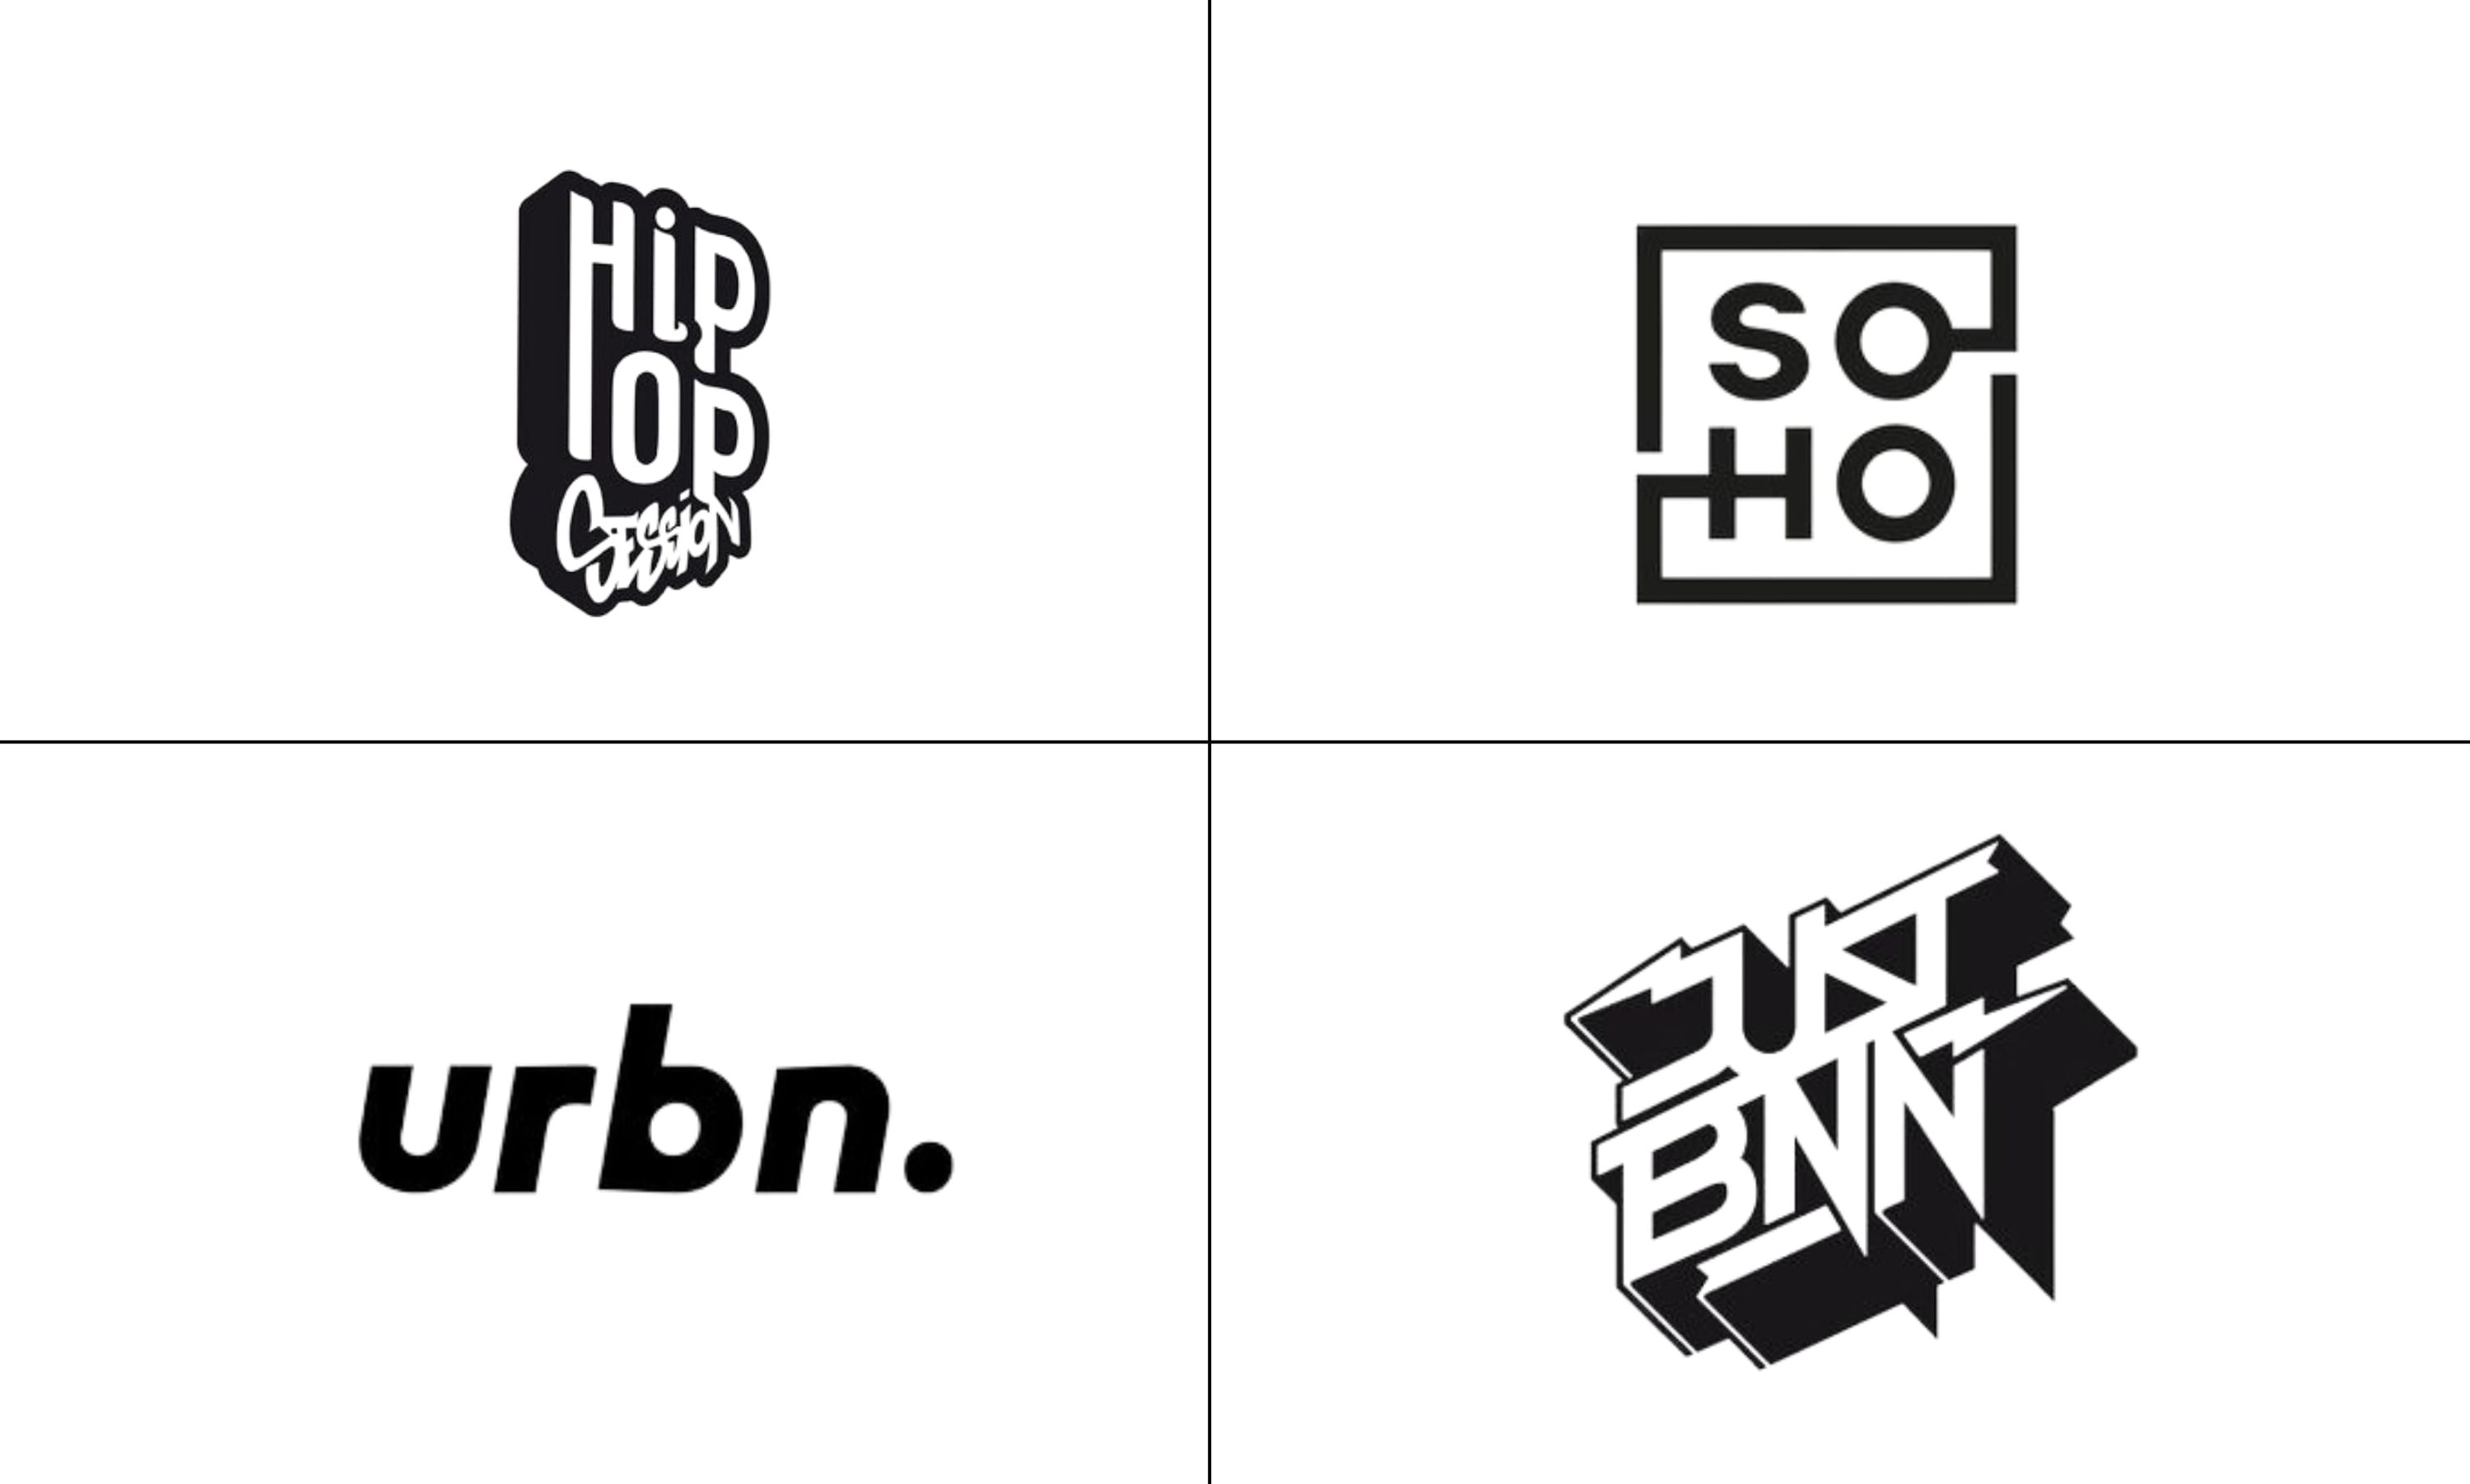 OpenDream - create a minimalist streetwear logo for a clothing brand based  on skateboard